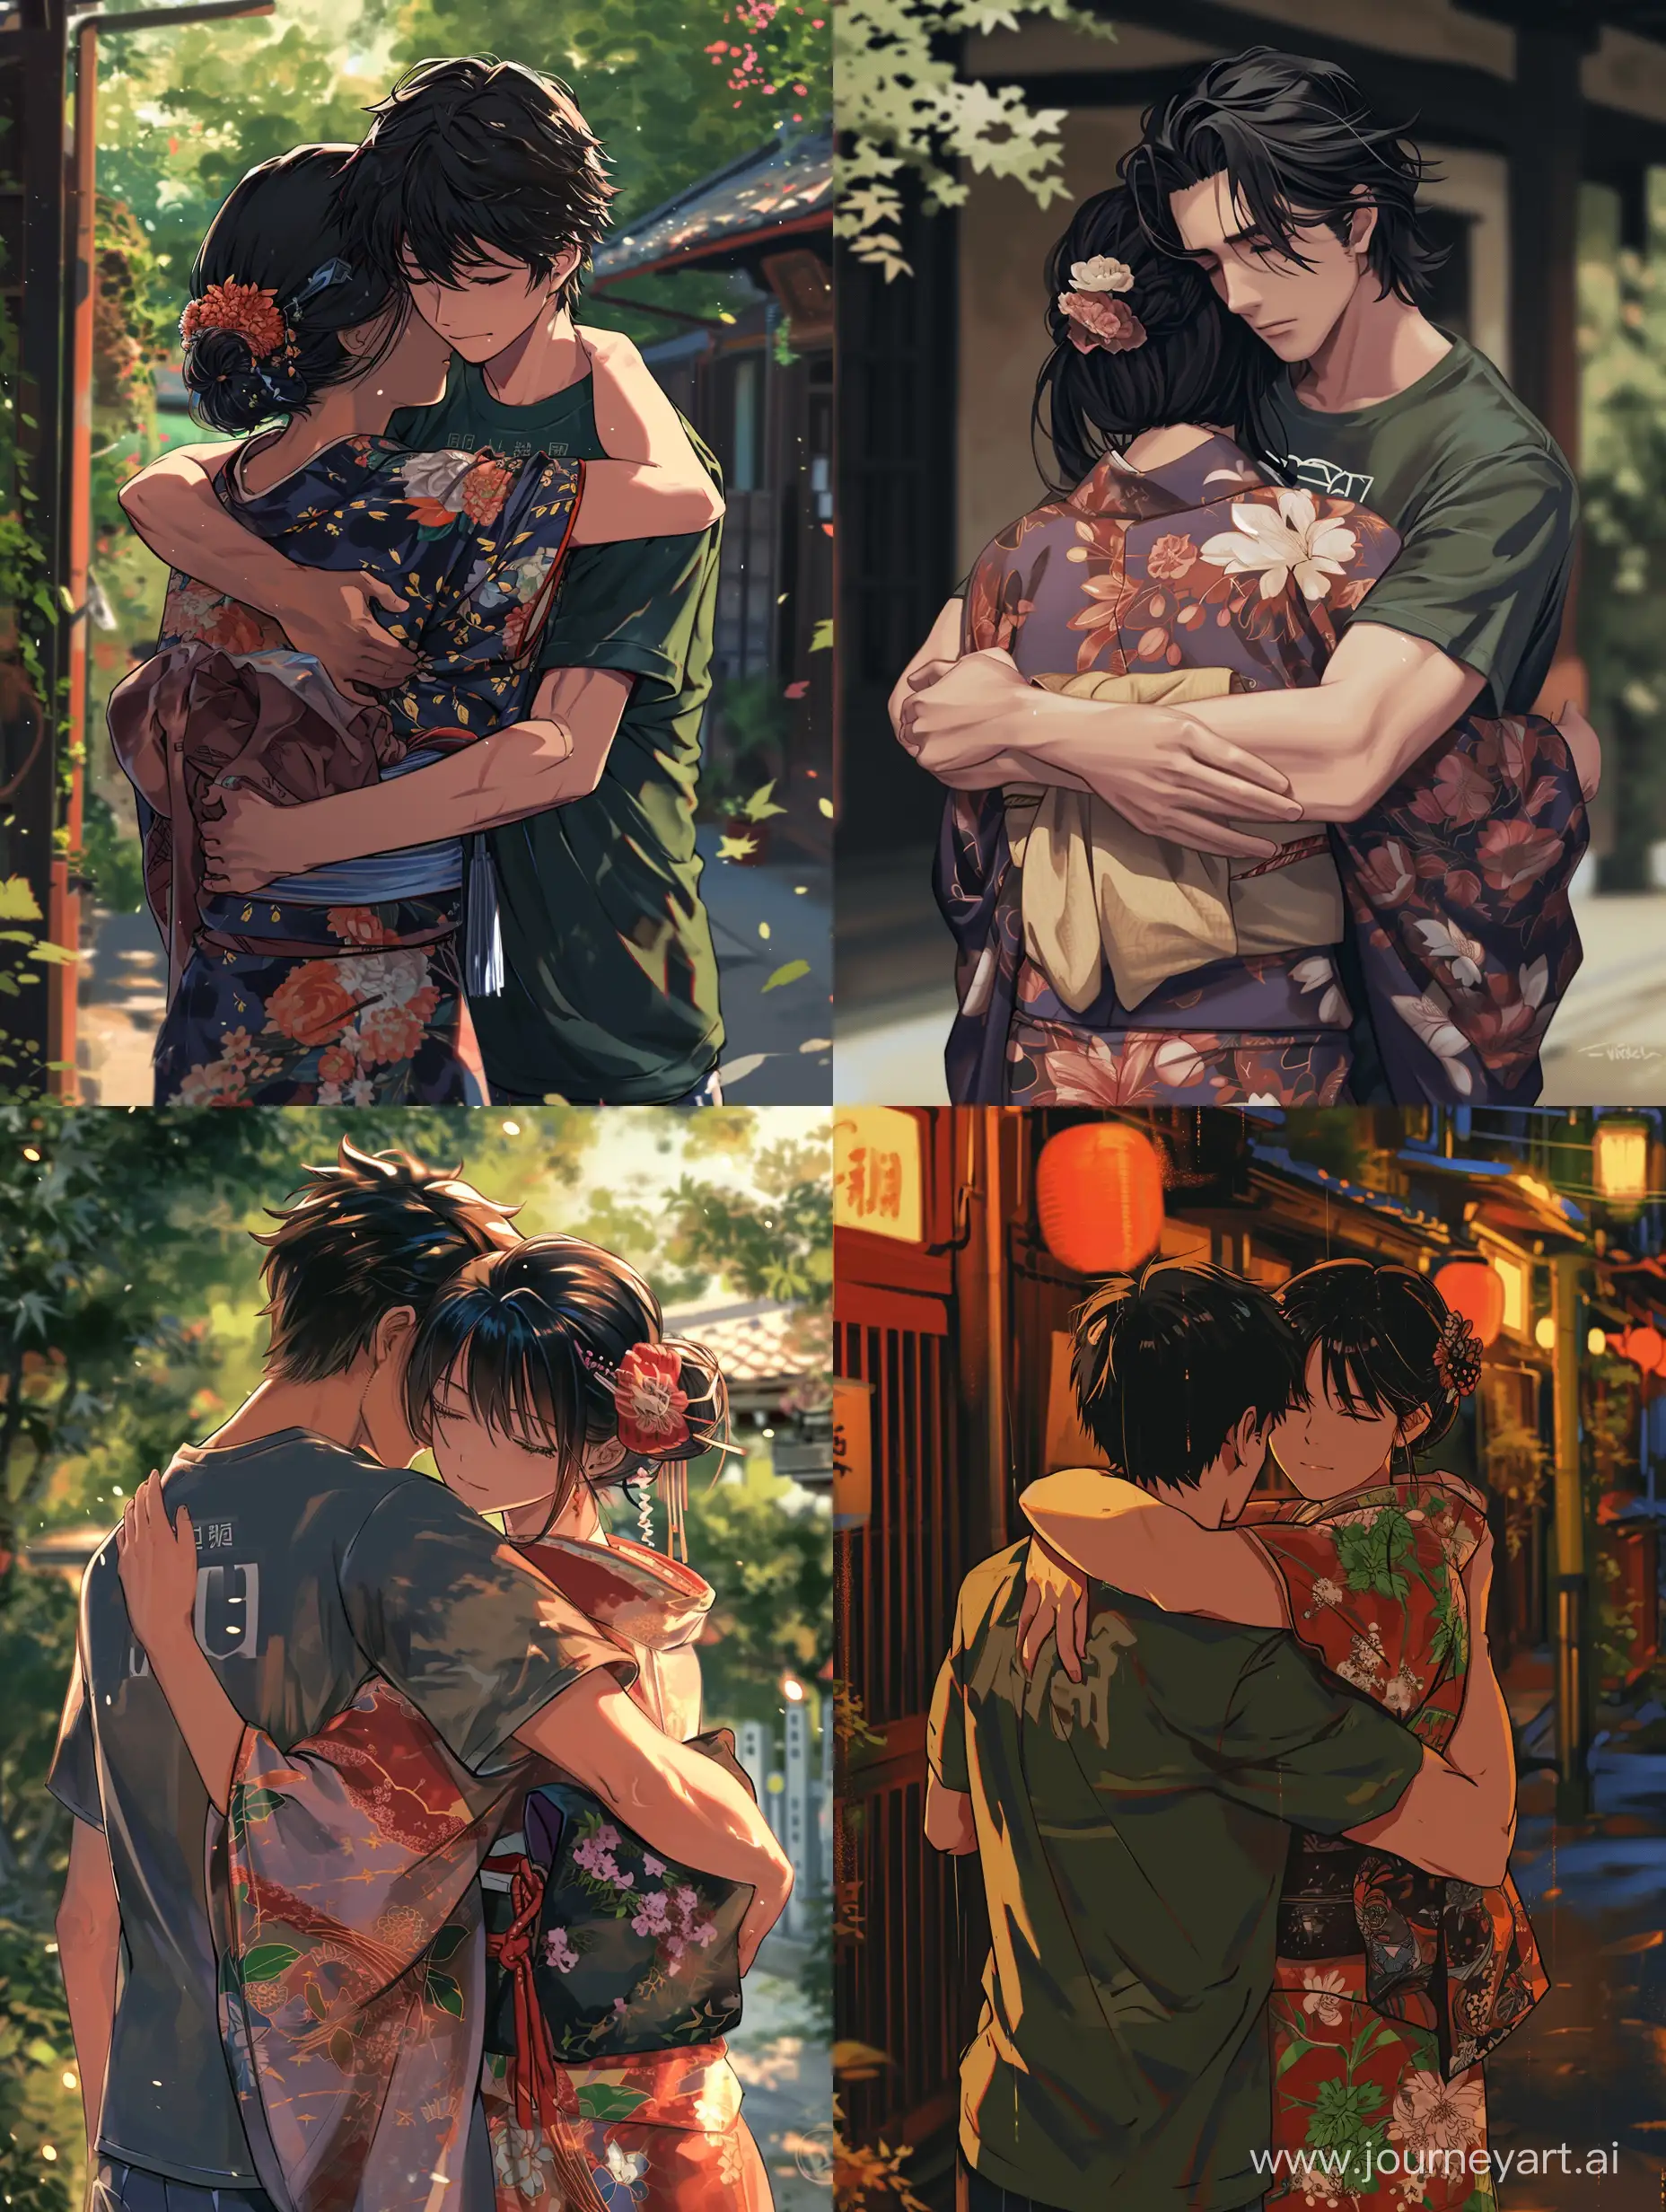 Embracing-Love-Intimate-Anime-Scene-with-Man-in-TShirt-and-Woman-in-Kimono